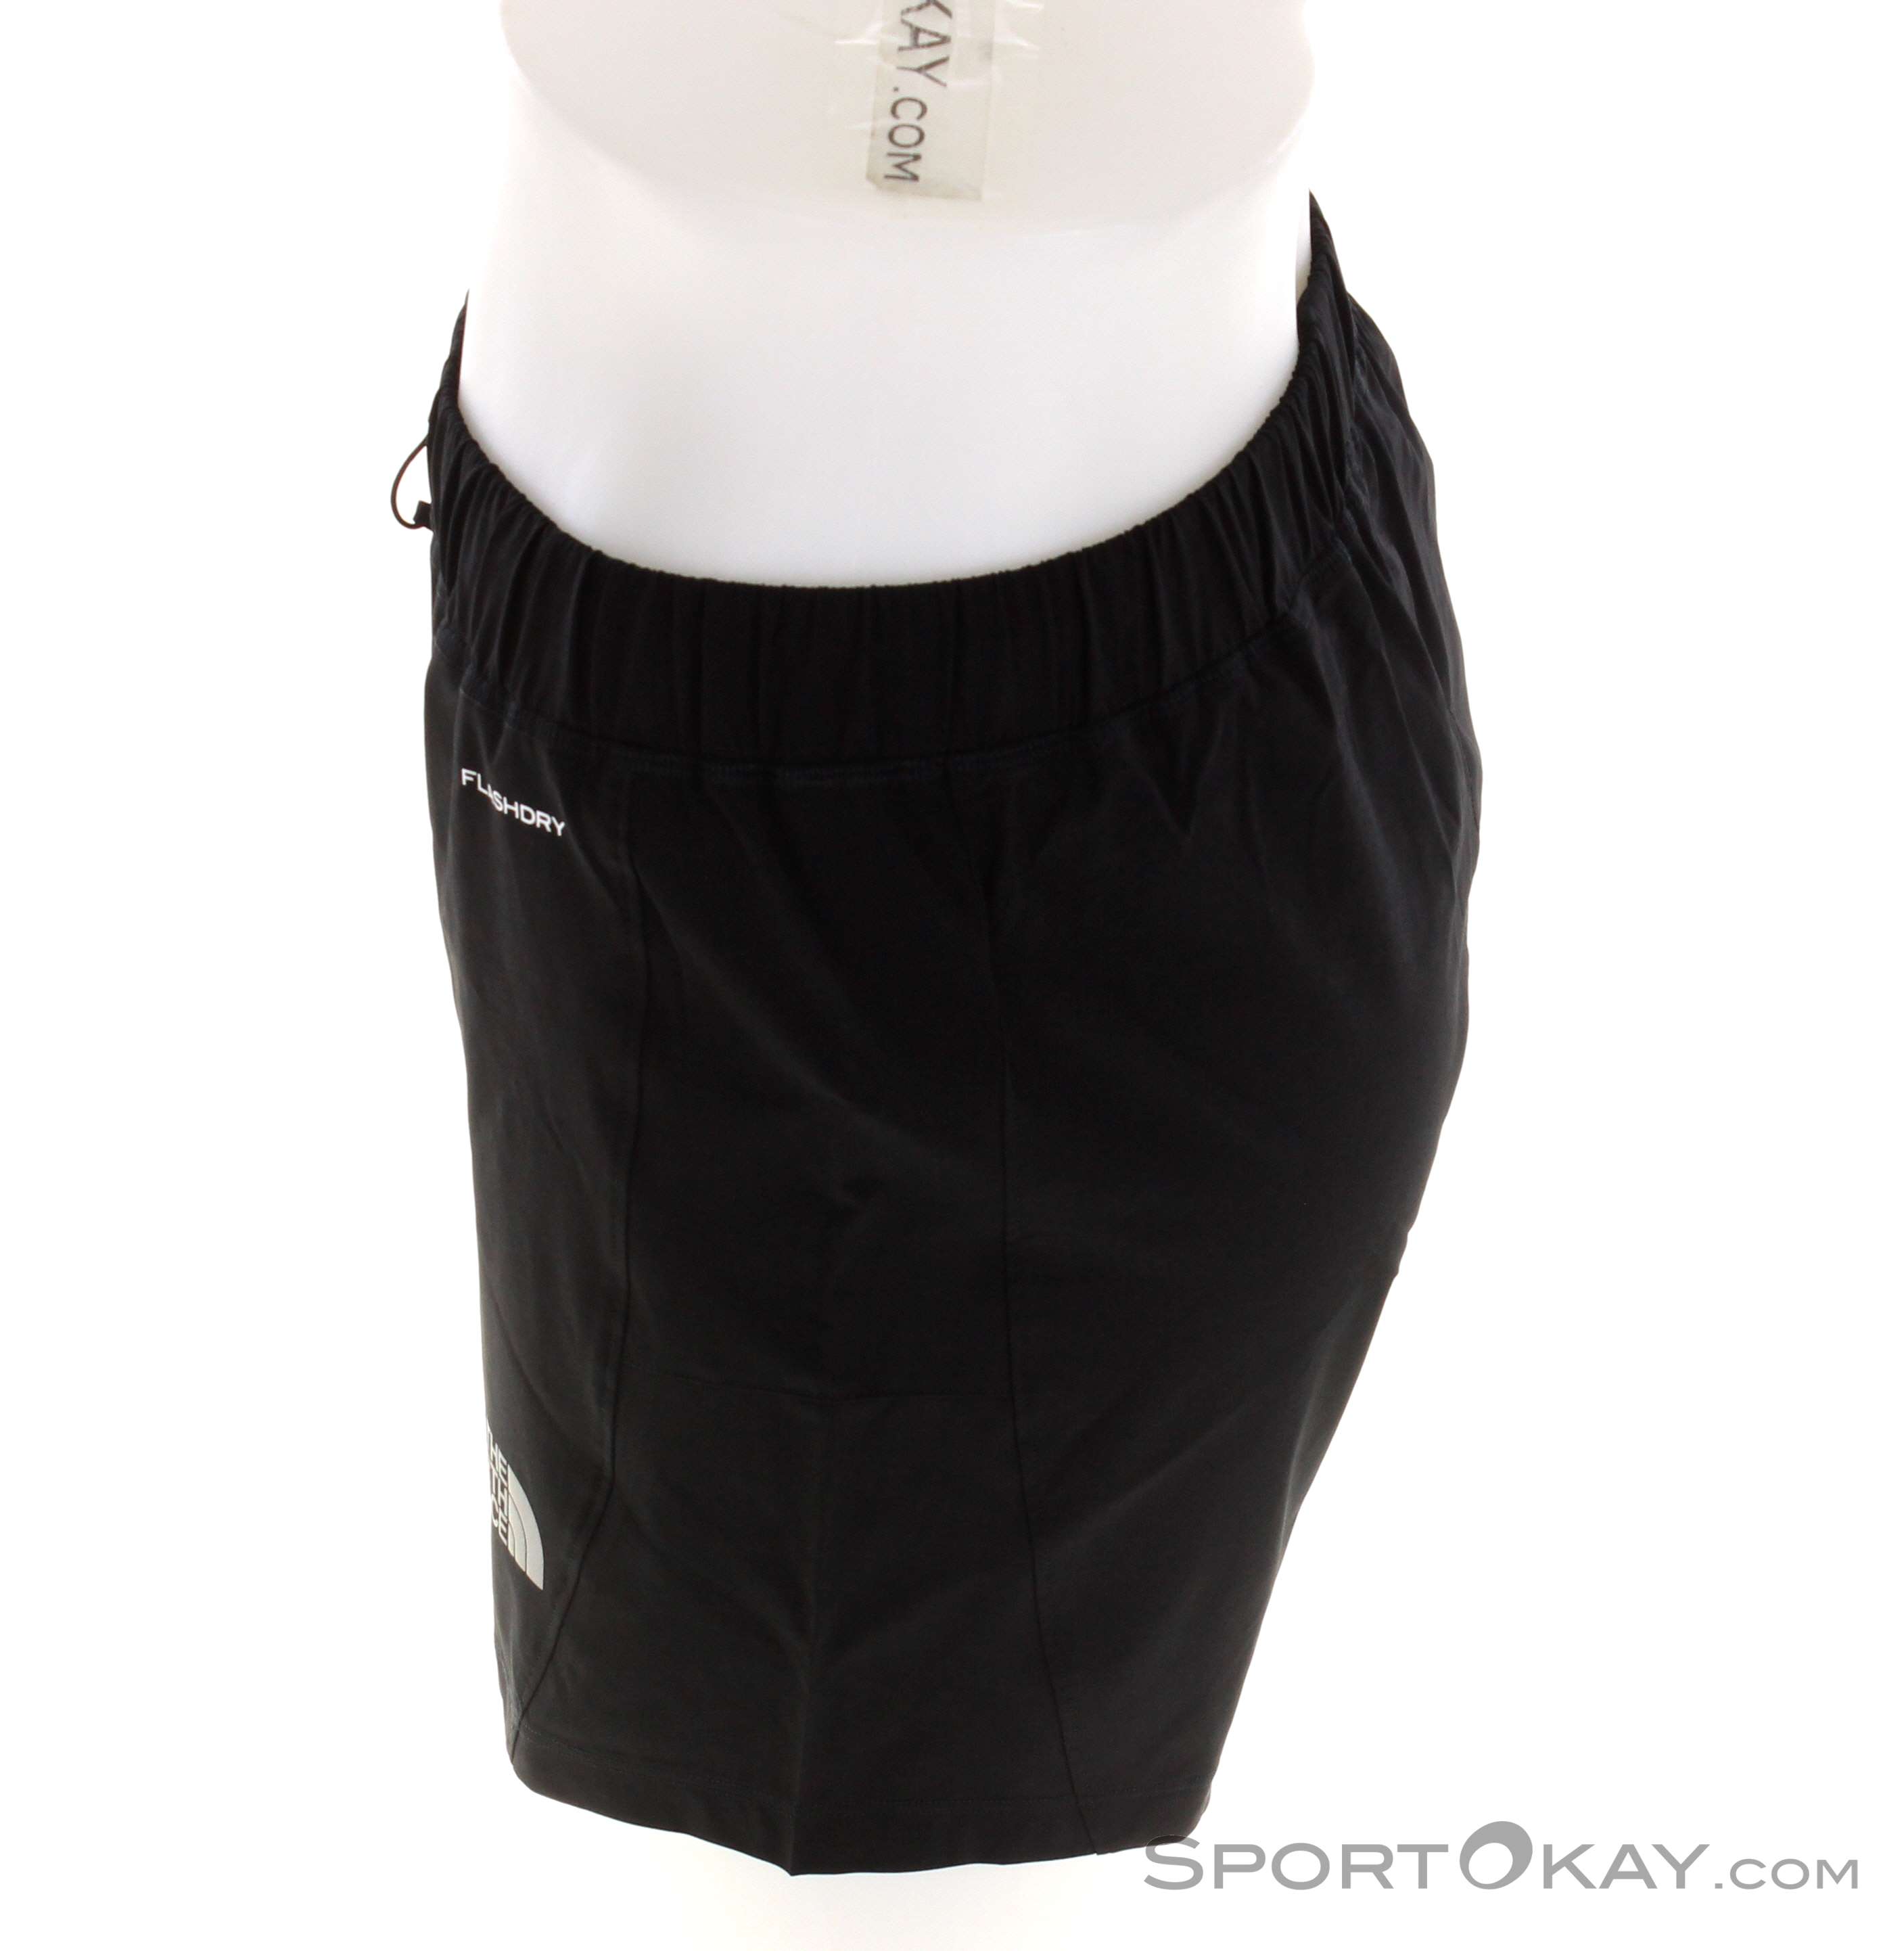 The North Face 2 In 1 Shorts - Running Shorts Women's, Buy online